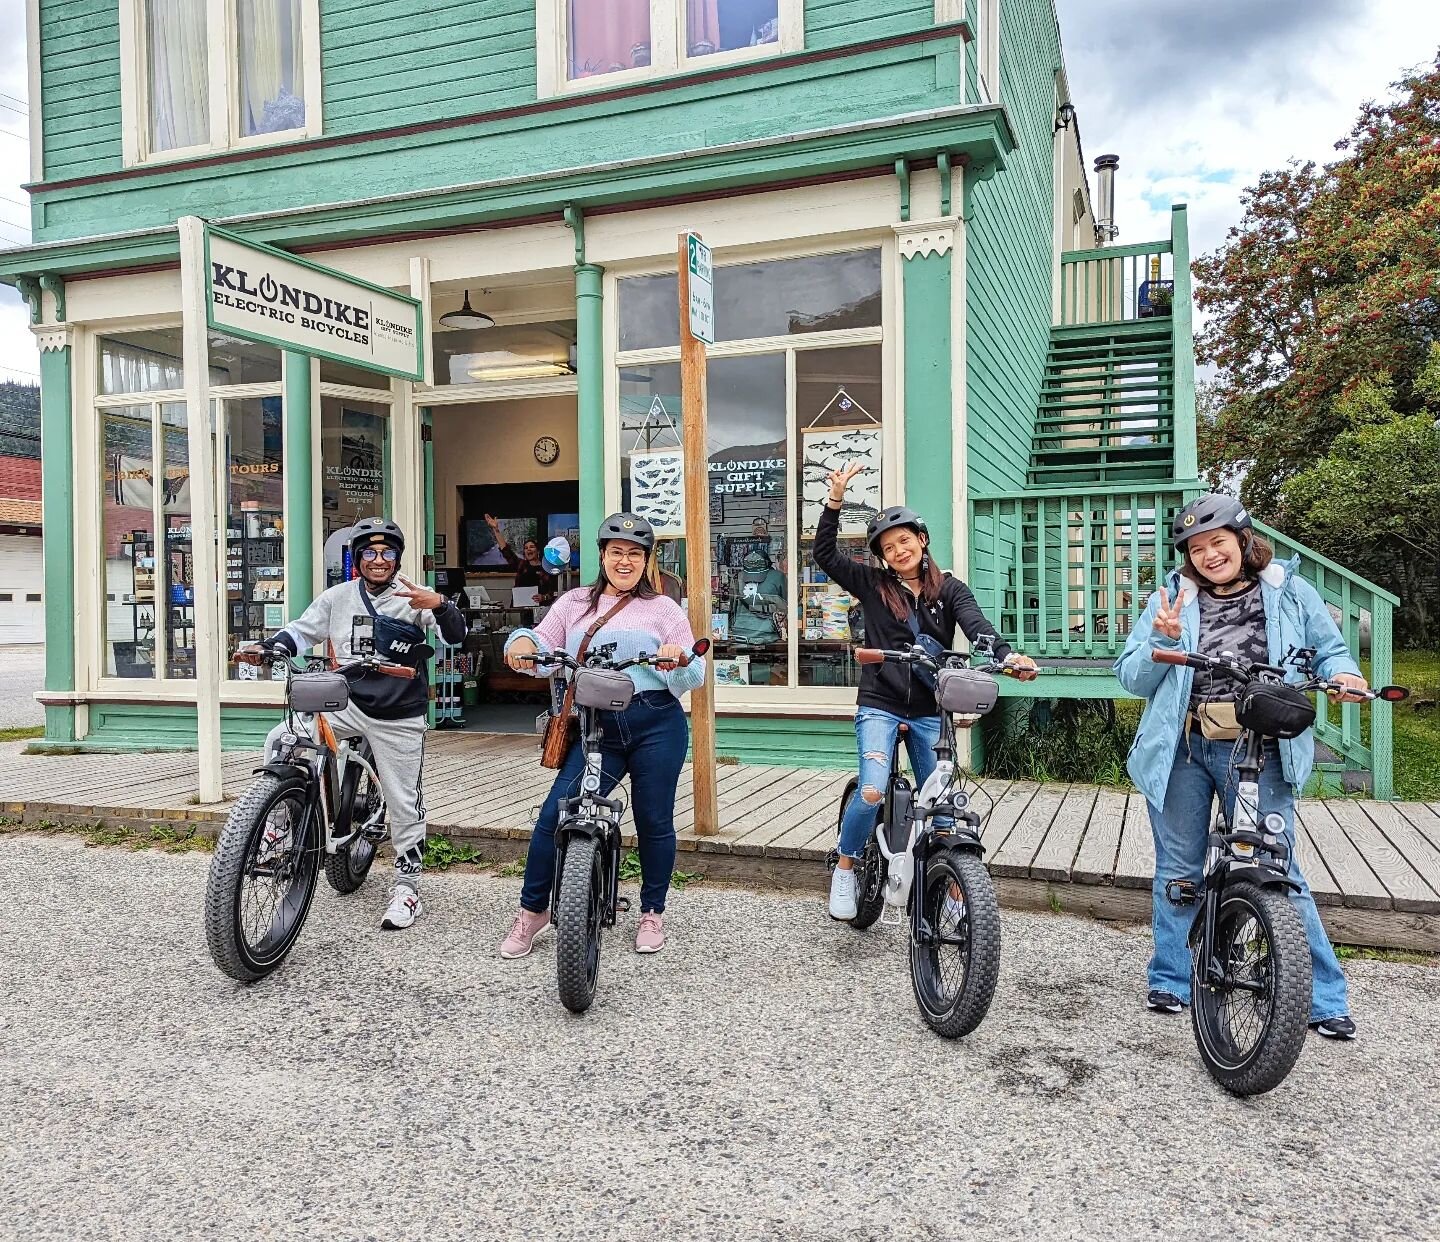 We love visits from crew members!  They are like extended family!

Shout out to some of our favorites from the #nieuwamsterdam !

Hard to believe we only have a few more weeks for them to visit us here in Alaska!
.
.
.
#klondikeelectricbikes #klondik